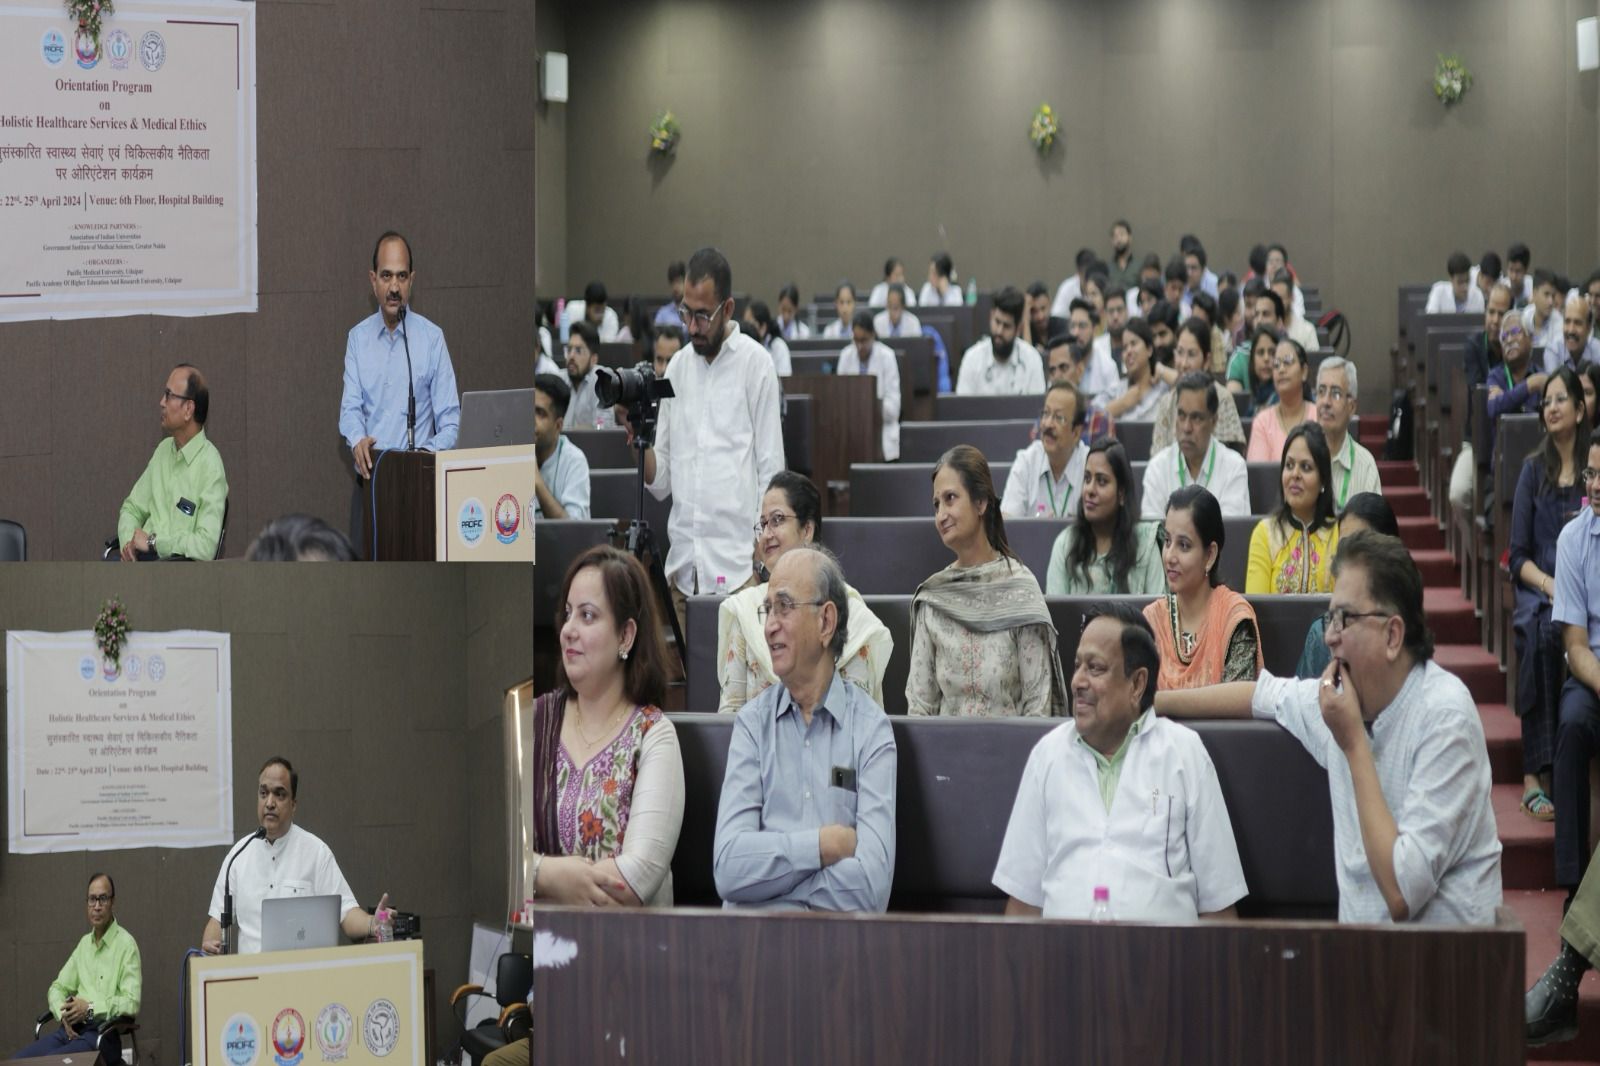 Orientation Program on 'Cultured Health Services and Medical Ethics'@PMCH